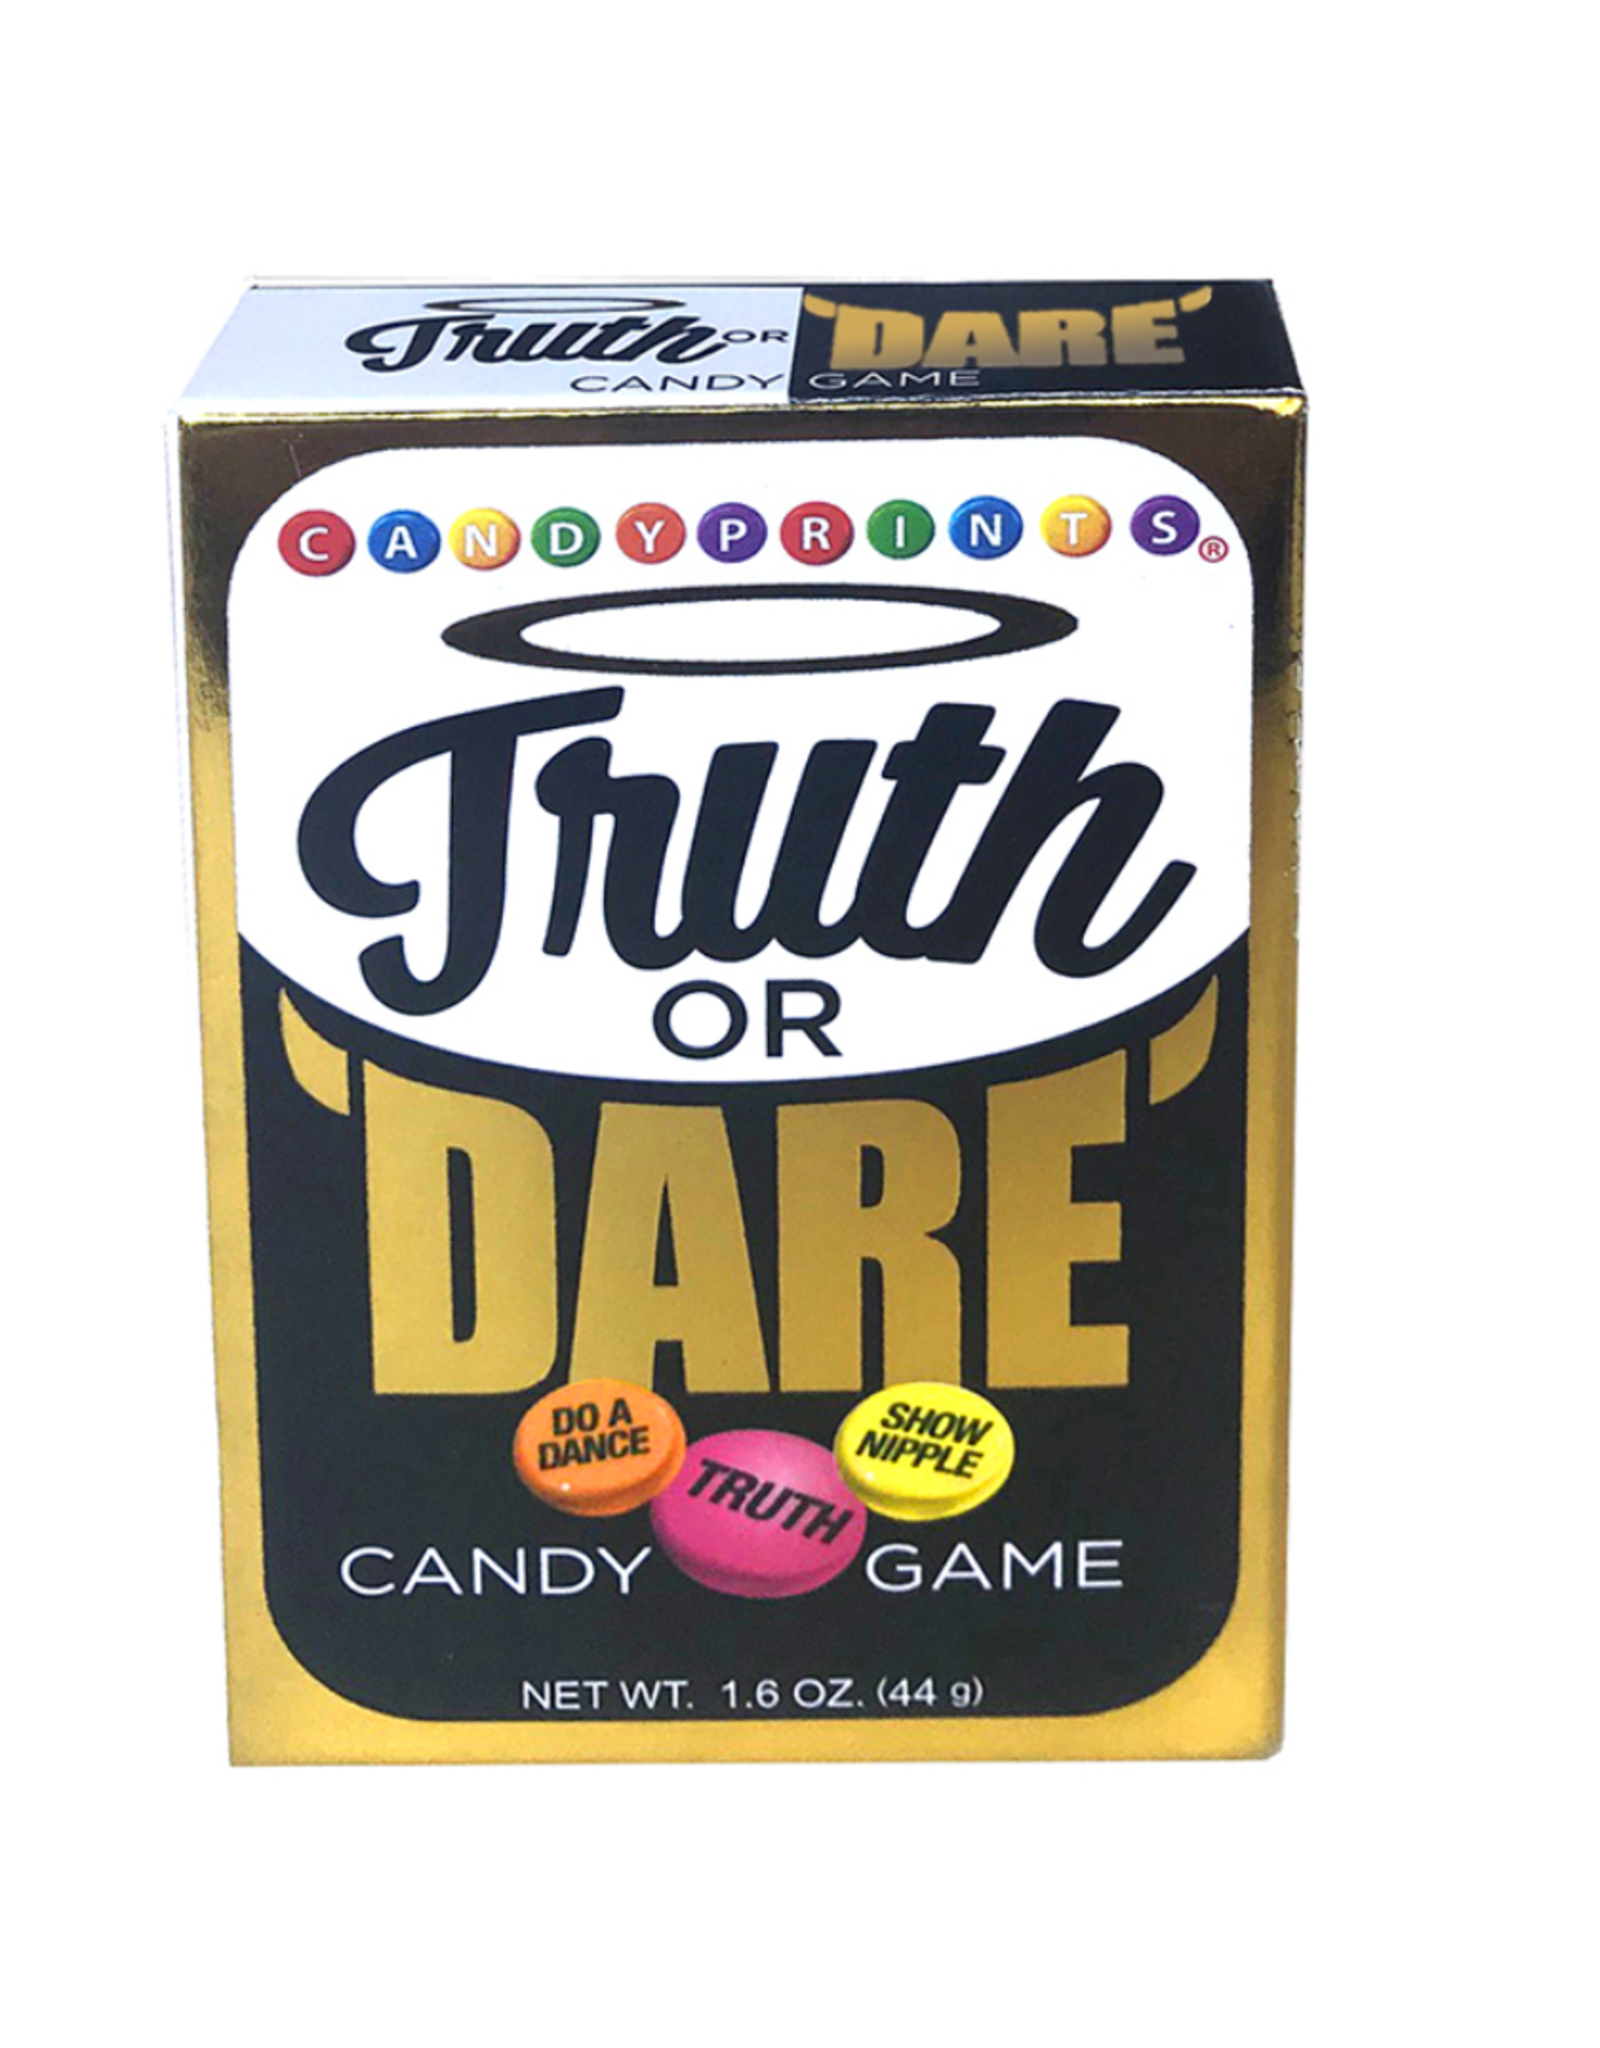 Candyprints Truth Or Dare Candy Single Box